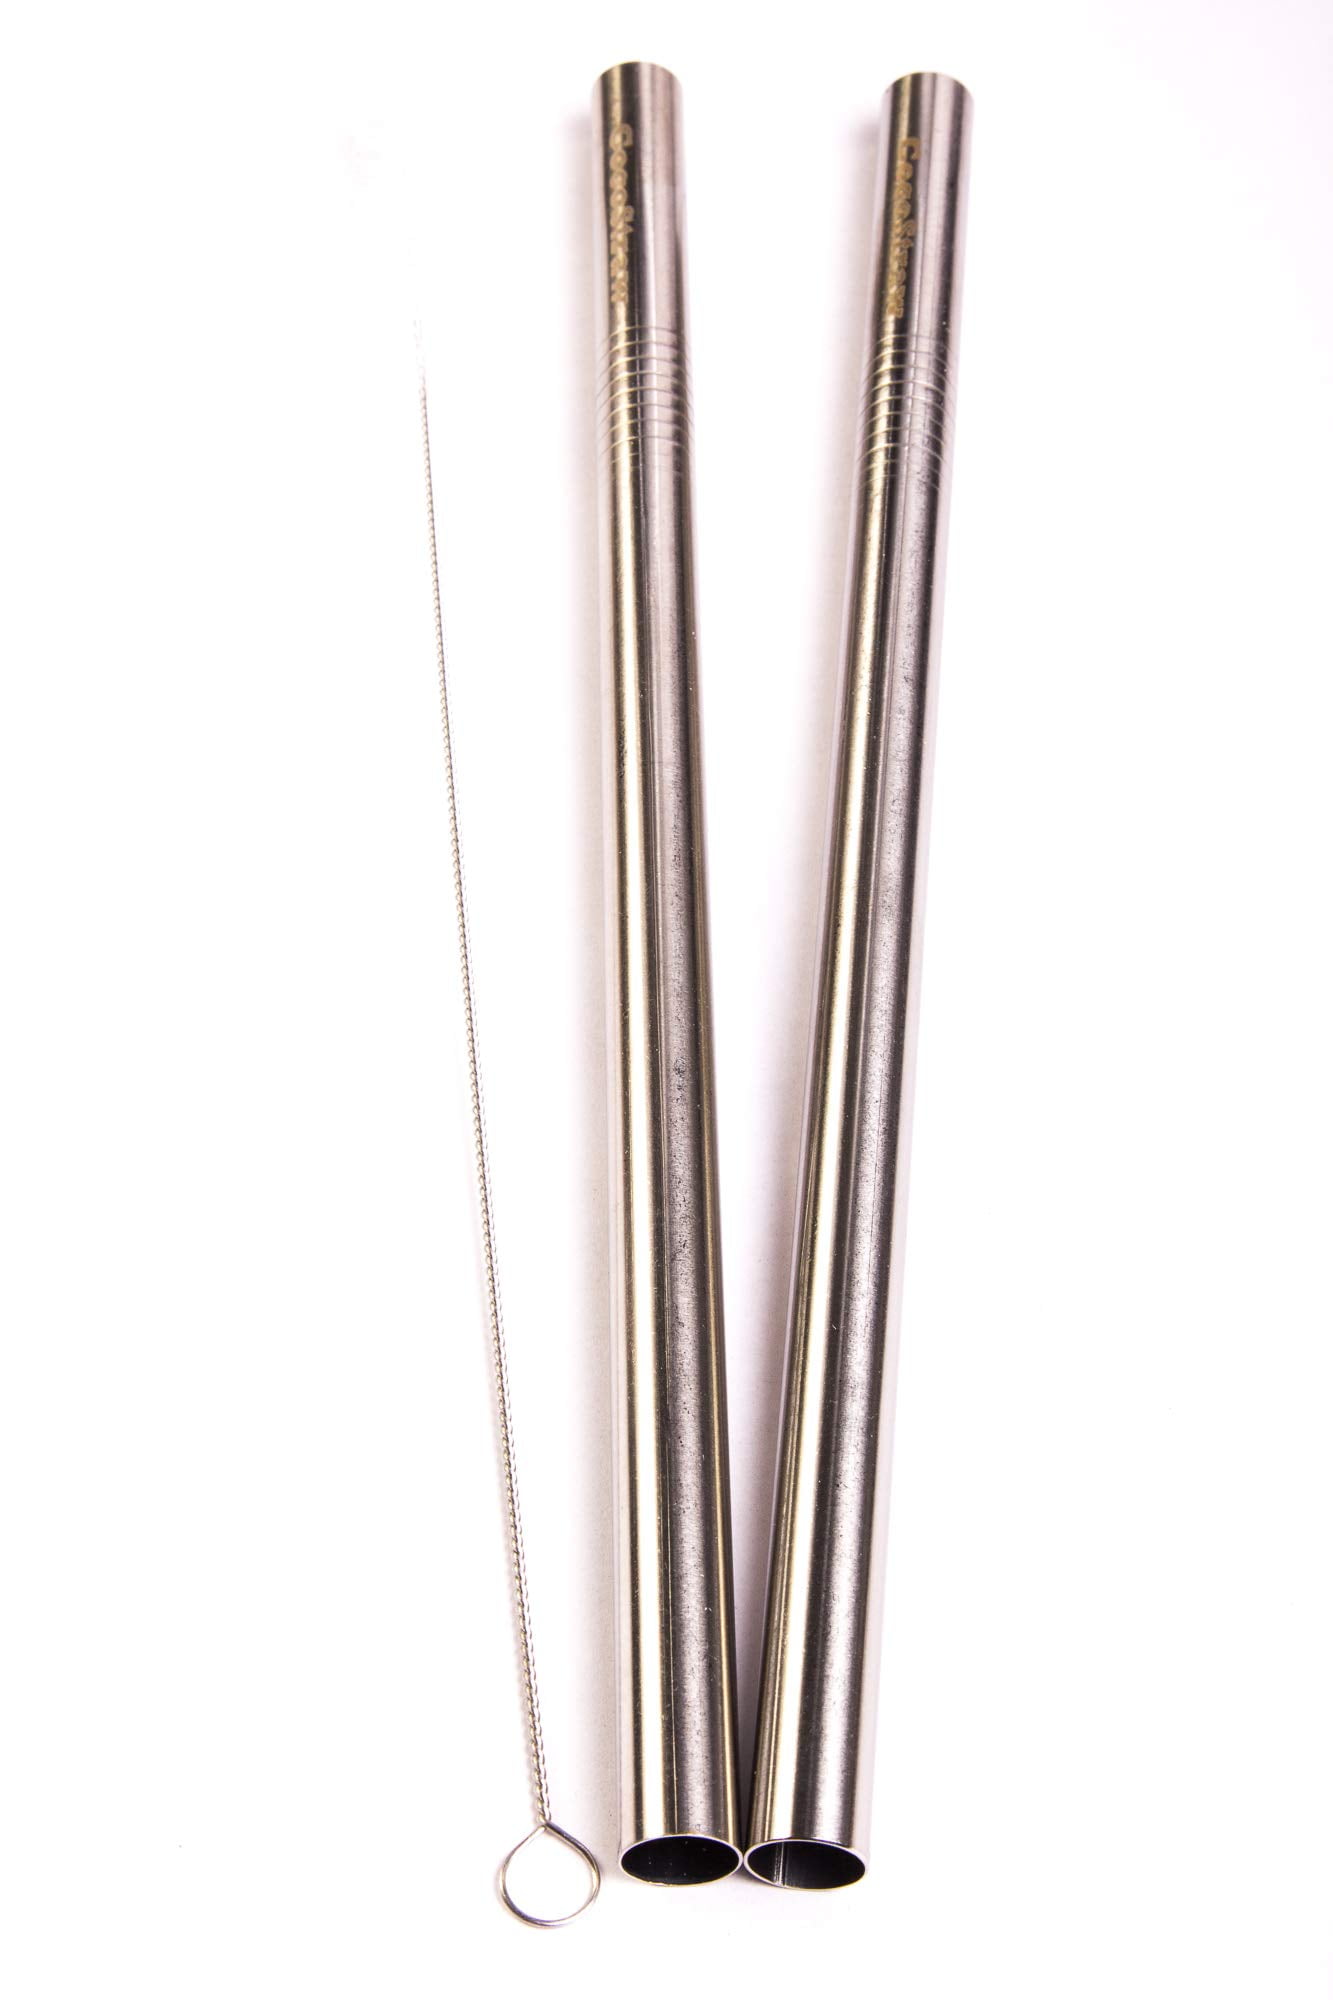 Angled Rainbow Eco Friendly Reusable Extra Wide Metal Straw Stainless Steel  Viral Perfect for Boba/bubble Tea 12mm Wide 